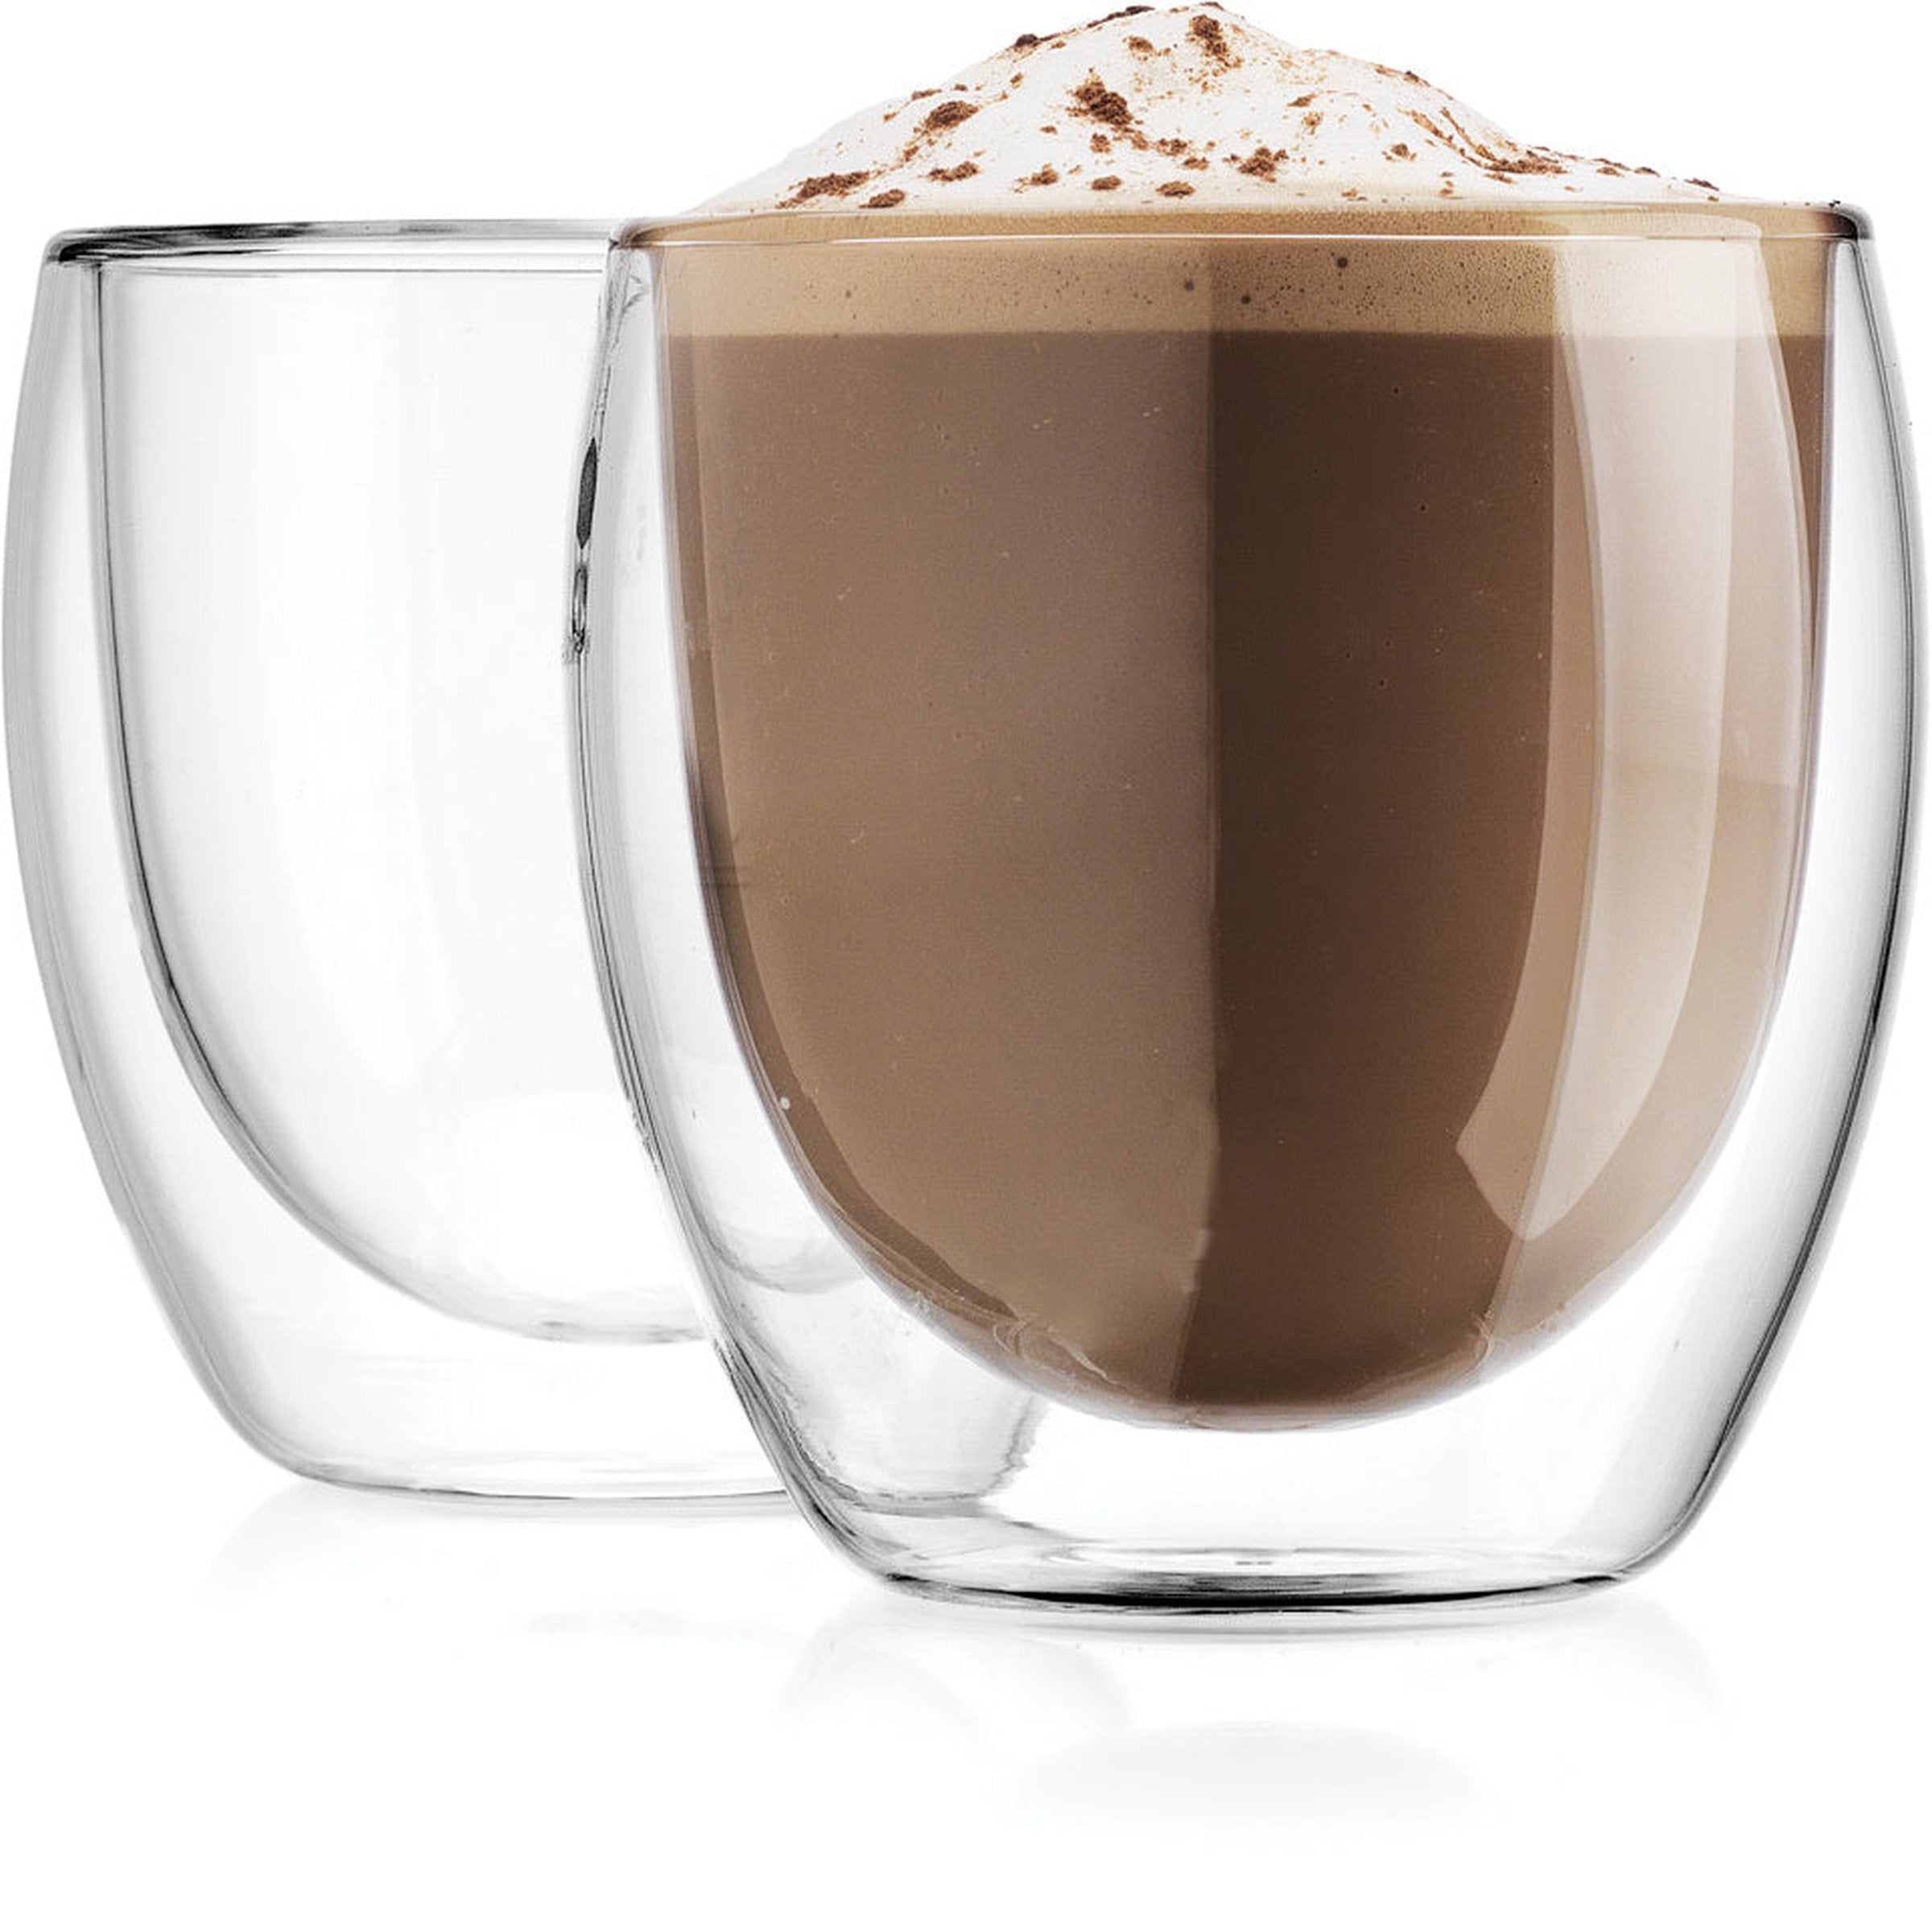 Godinger Alesia Double Walled Latte Cups, Set of 2